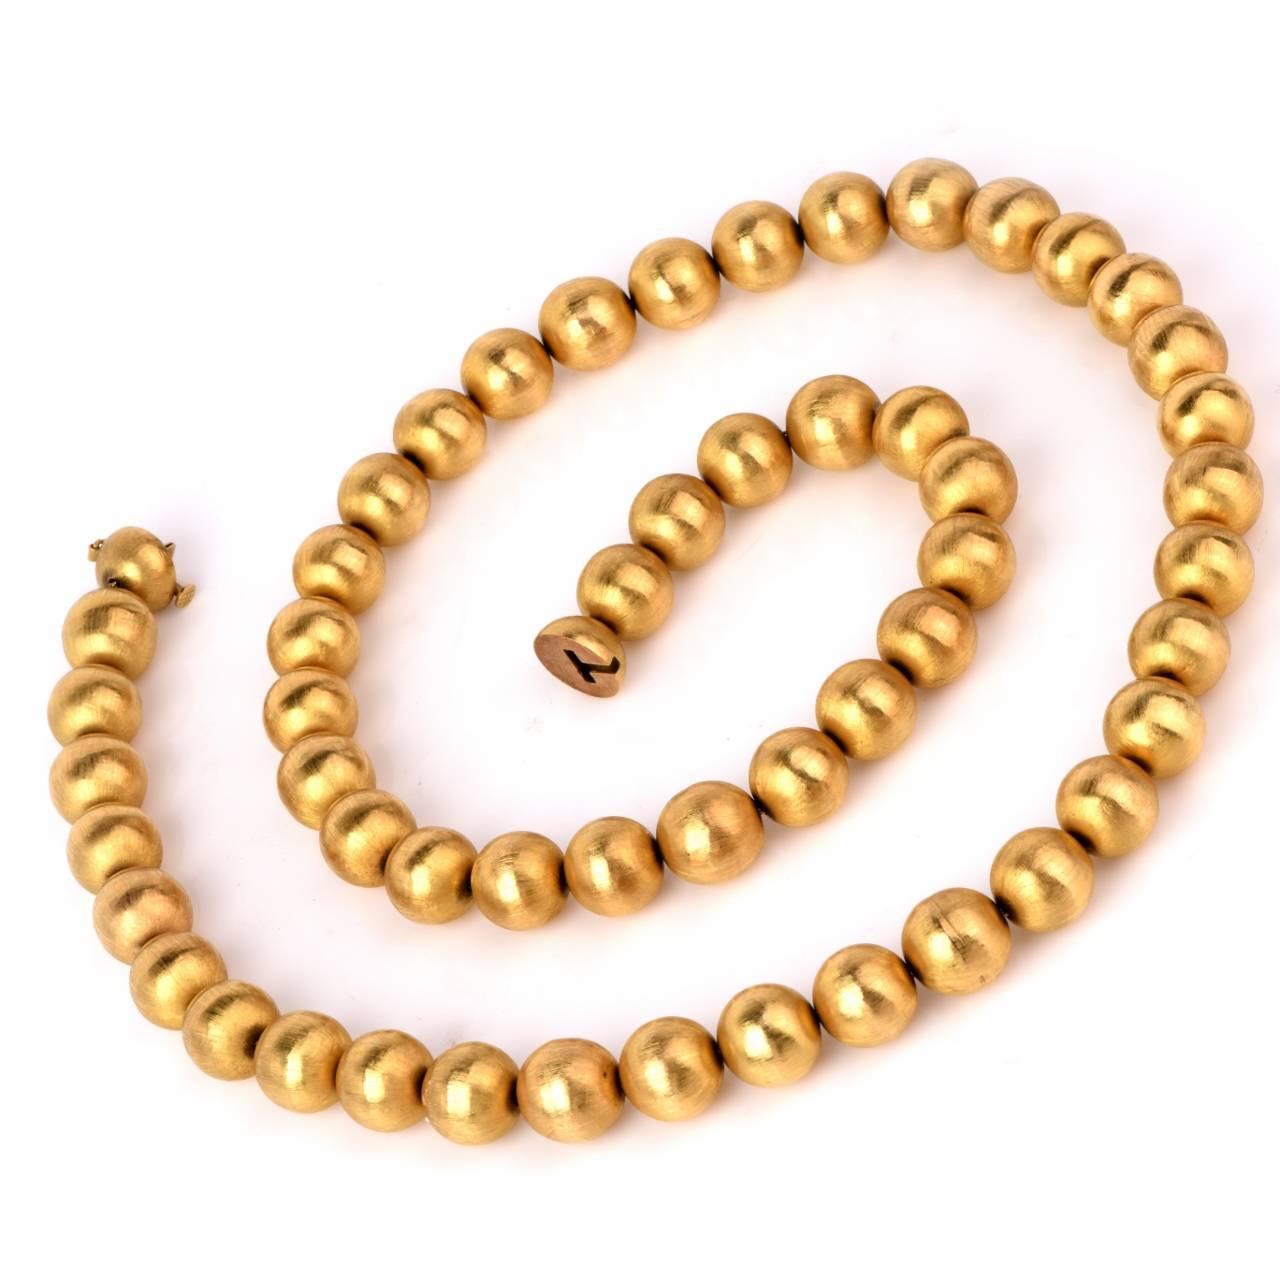 This vintage retro beads necklace is crafted in solid 18K yellow gold weighing approximately 133.10 grams and measures approx. 29 1/2" long. Each bead measures 14mm displaying a satin finish to add to its elegance. The clasp is creatively